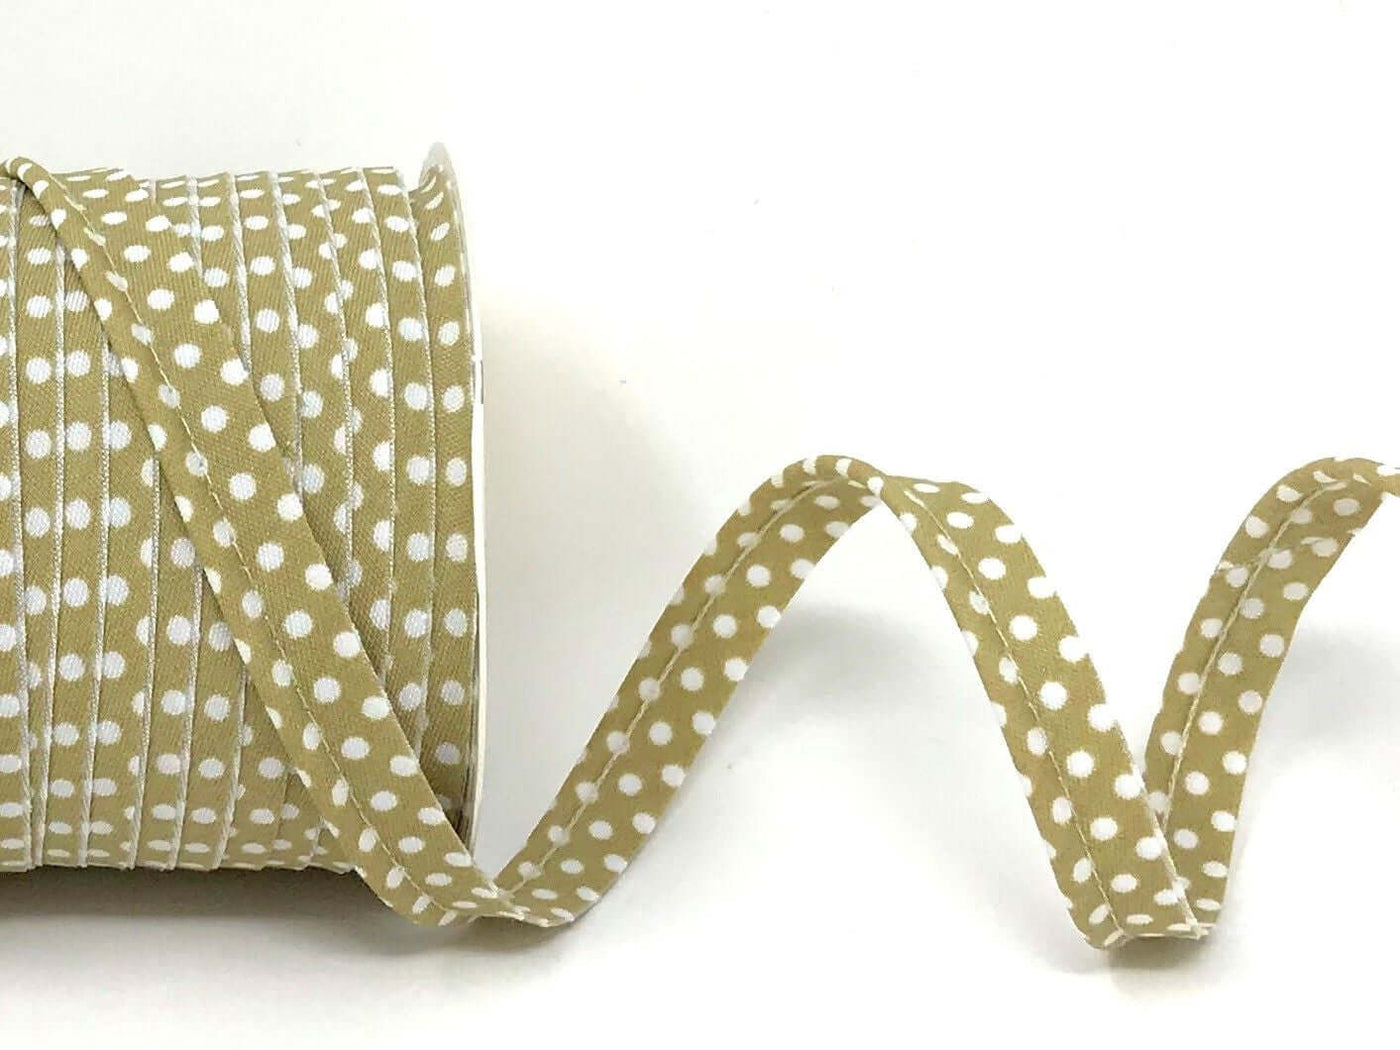 Patterned flanged 10mm wide piping cord trim 2 mm. Floral and polkadot trim. Per Metre